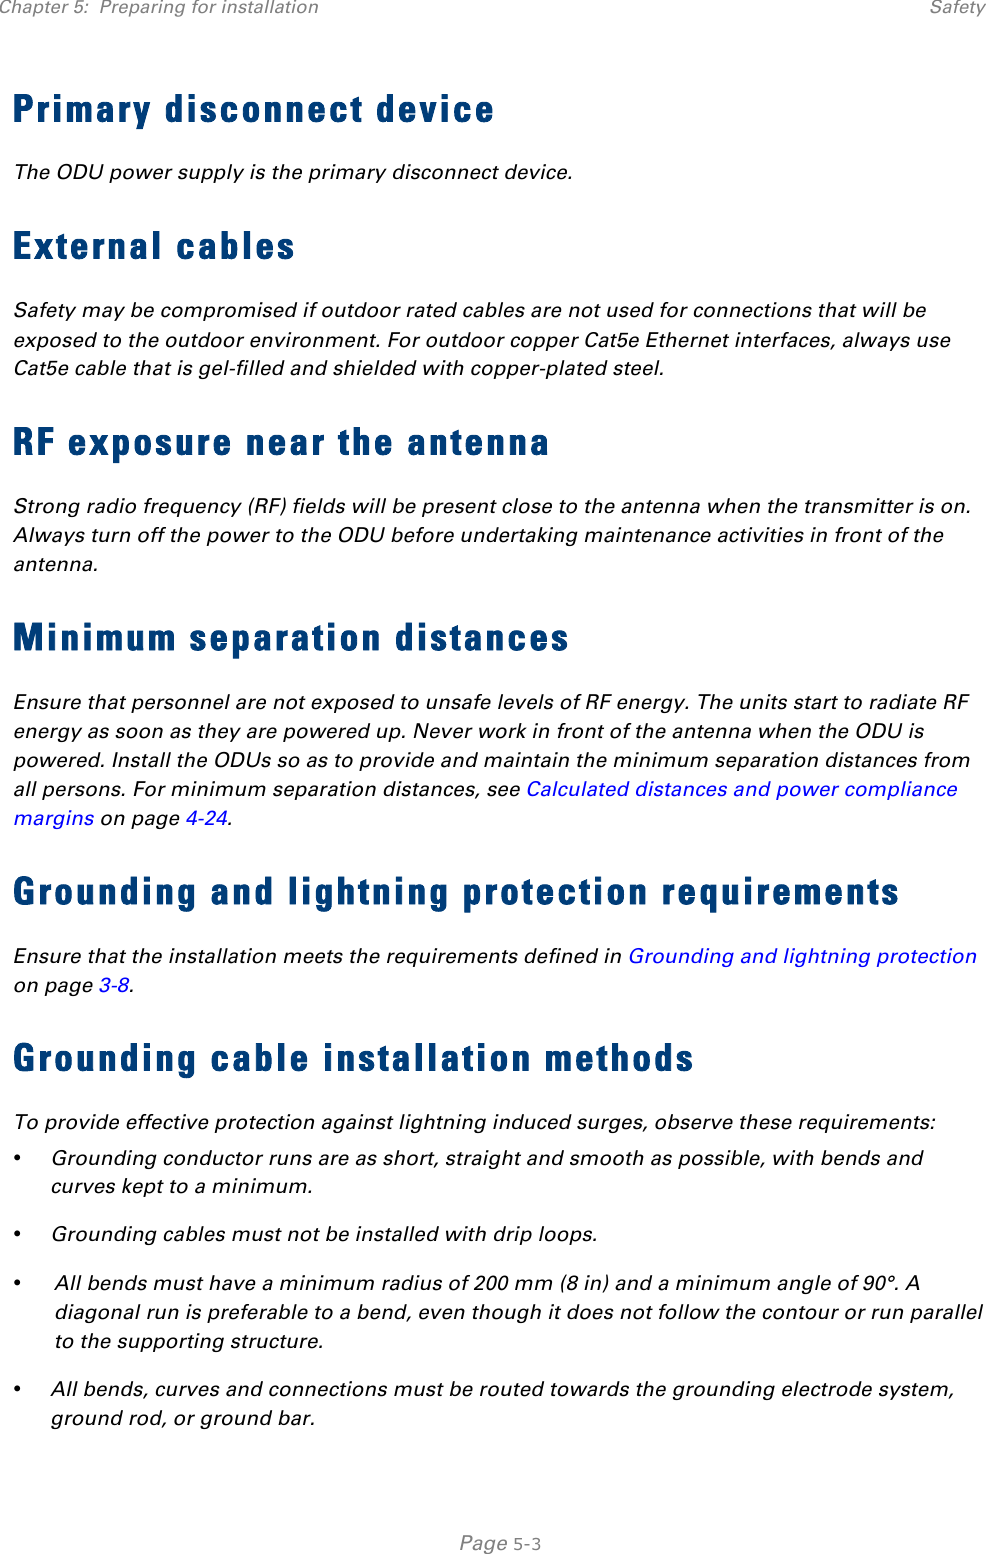 Chapter 5:  Preparing for installation Safety   Page 5-3 Primary disconnect device The ODU power supply is the primary disconnect device.  External cables Safety may be compromised if outdoor rated cables are not used for connections that will be exposed to the outdoor environment. For outdoor copper Cat5e Ethernet interfaces, always use Cat5e cable that is gel-filled and shielded with copper-plated steel.  RF exposure near the antenna Strong radio frequency (RF) fields will be present close to the antenna when the transmitter is on. Always turn off the power to the ODU before undertaking maintenance activities in front of the antenna. Minimum separation distances Ensure that personnel are not exposed to unsafe levels of RF energy. The units start to radiate RF energy as soon as they are powered up. Never work in front of the antenna when the ODU is powered. Install the ODUs so as to provide and maintain the minimum separation distances from all persons. For minimum separation distances, see Calculated distances and power compliance margins on page 4-24. Grounding and lightning protection requirements Ensure that the installation meets the requirements defined in Grounding and lightning protection on page 3-8.  Grounding cable installation methods To provide effective protection against lightning induced surges, observe these requirements: • Grounding conductor runs are as short, straight and smooth as possible, with bends and curves kept to a minimum. • Grounding cables must not be installed with drip loops. • All bends must have a minimum radius of 200 mm (8 in) and a minimum angle of 90°. A diagonal run is preferable to a bend, even though it does not follow the contour or run parallel to the supporting structure. • All bends, curves and connections must be routed towards the grounding electrode system, ground rod, or ground bar. 